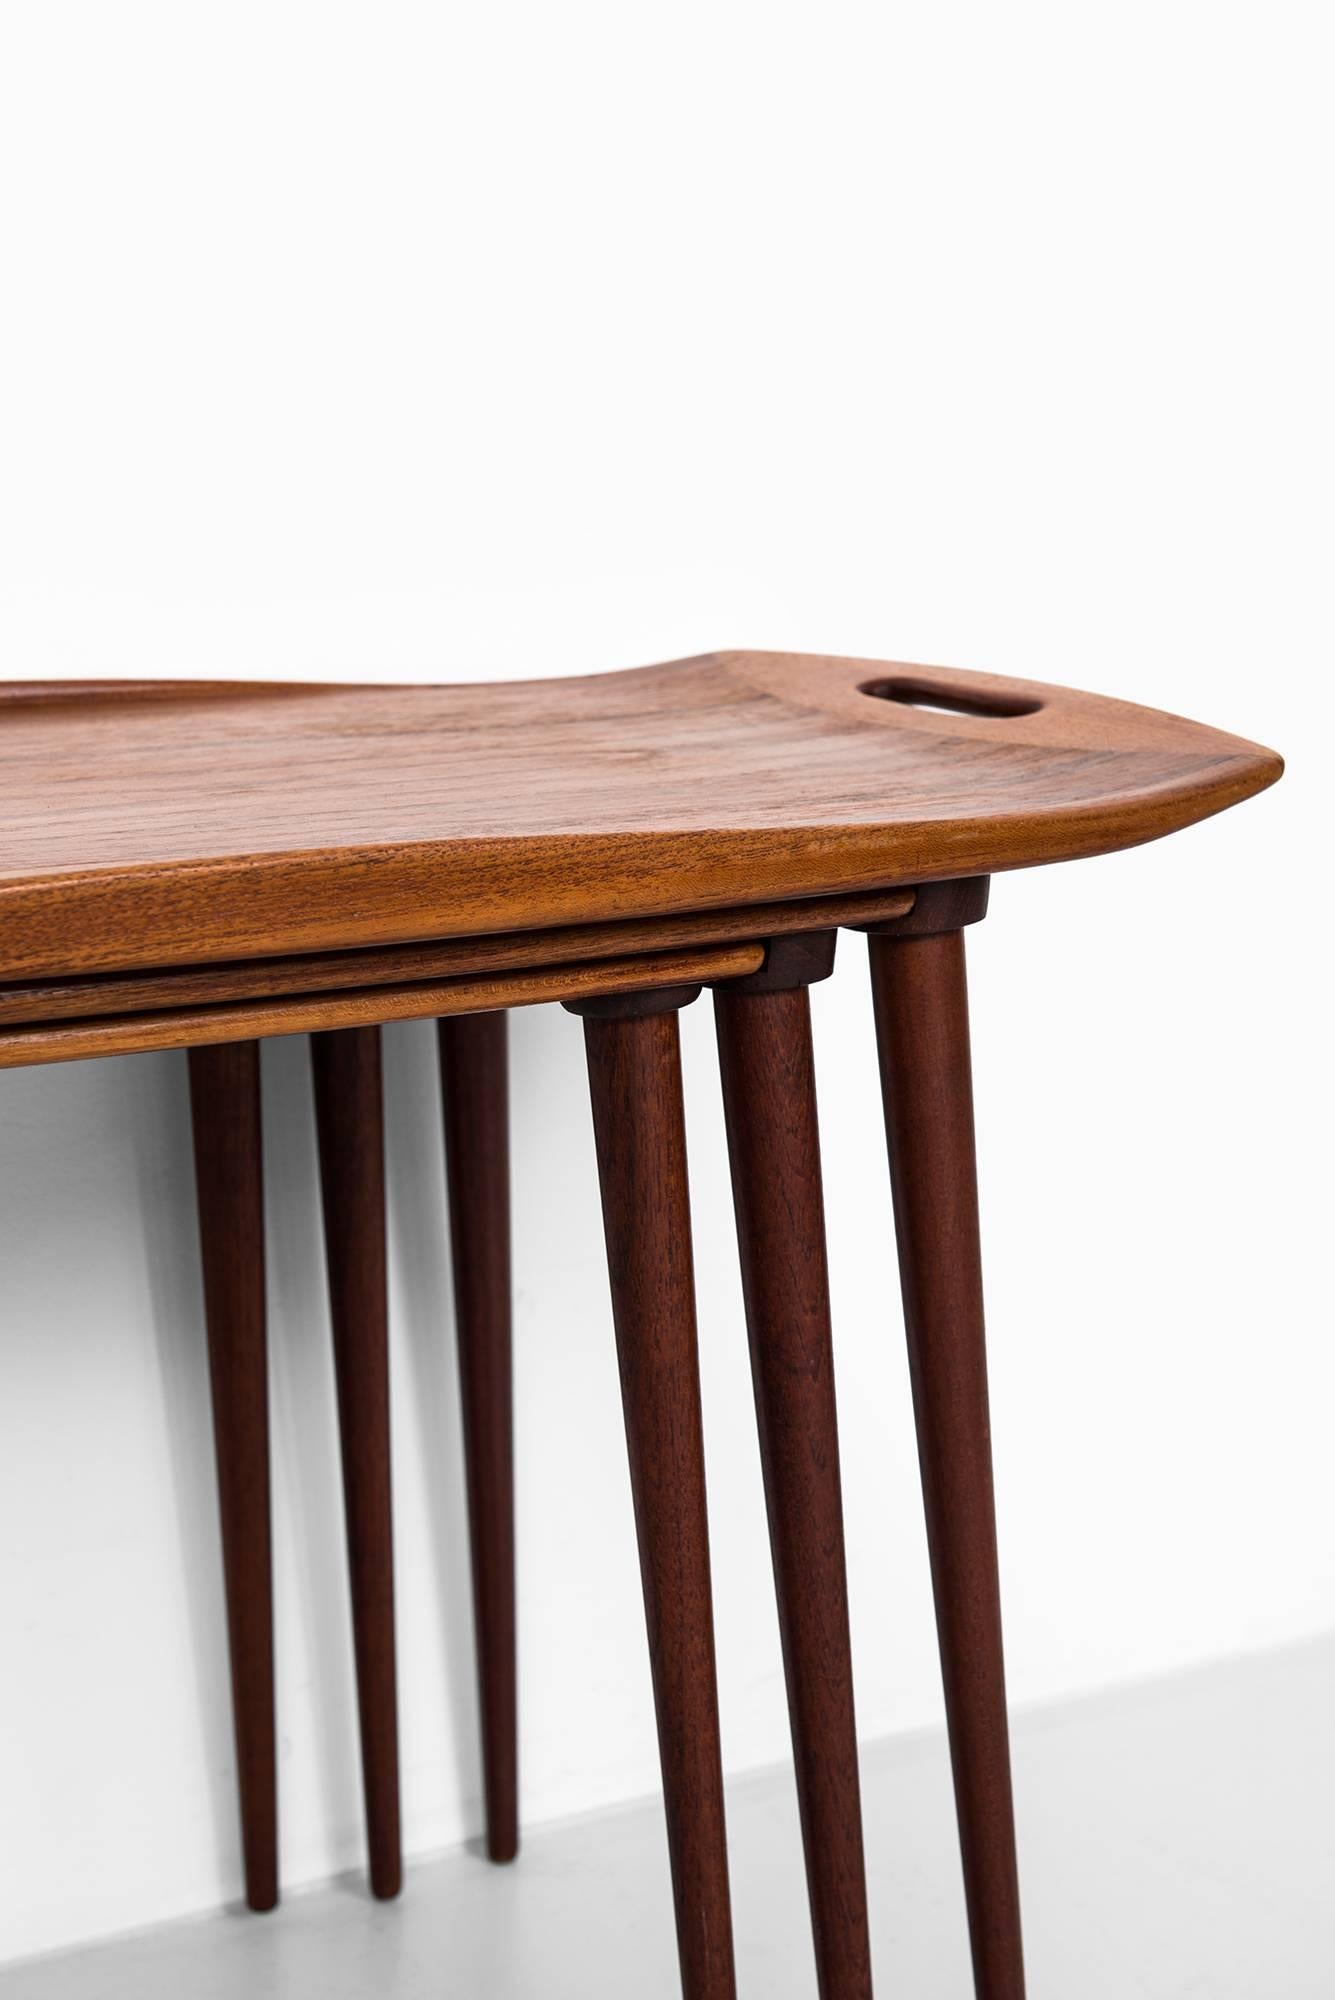 Nesting tables designed by Jens Harald Quistgaard. Produced by Nissen in Denmark.